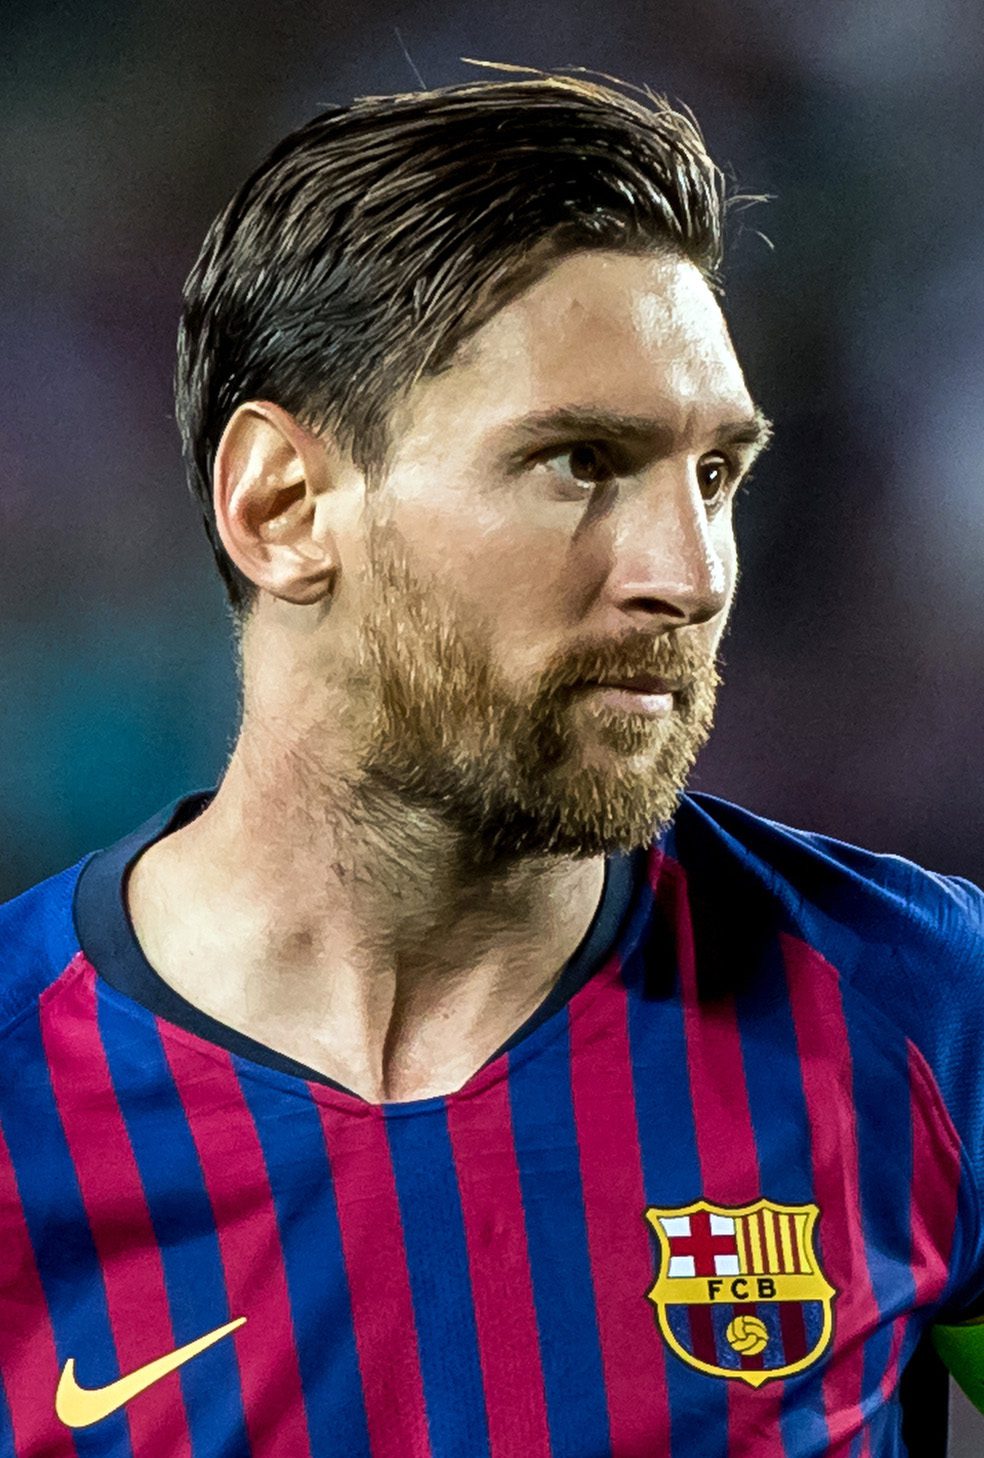 Lionel Messi's Slicked Back Hairstyle